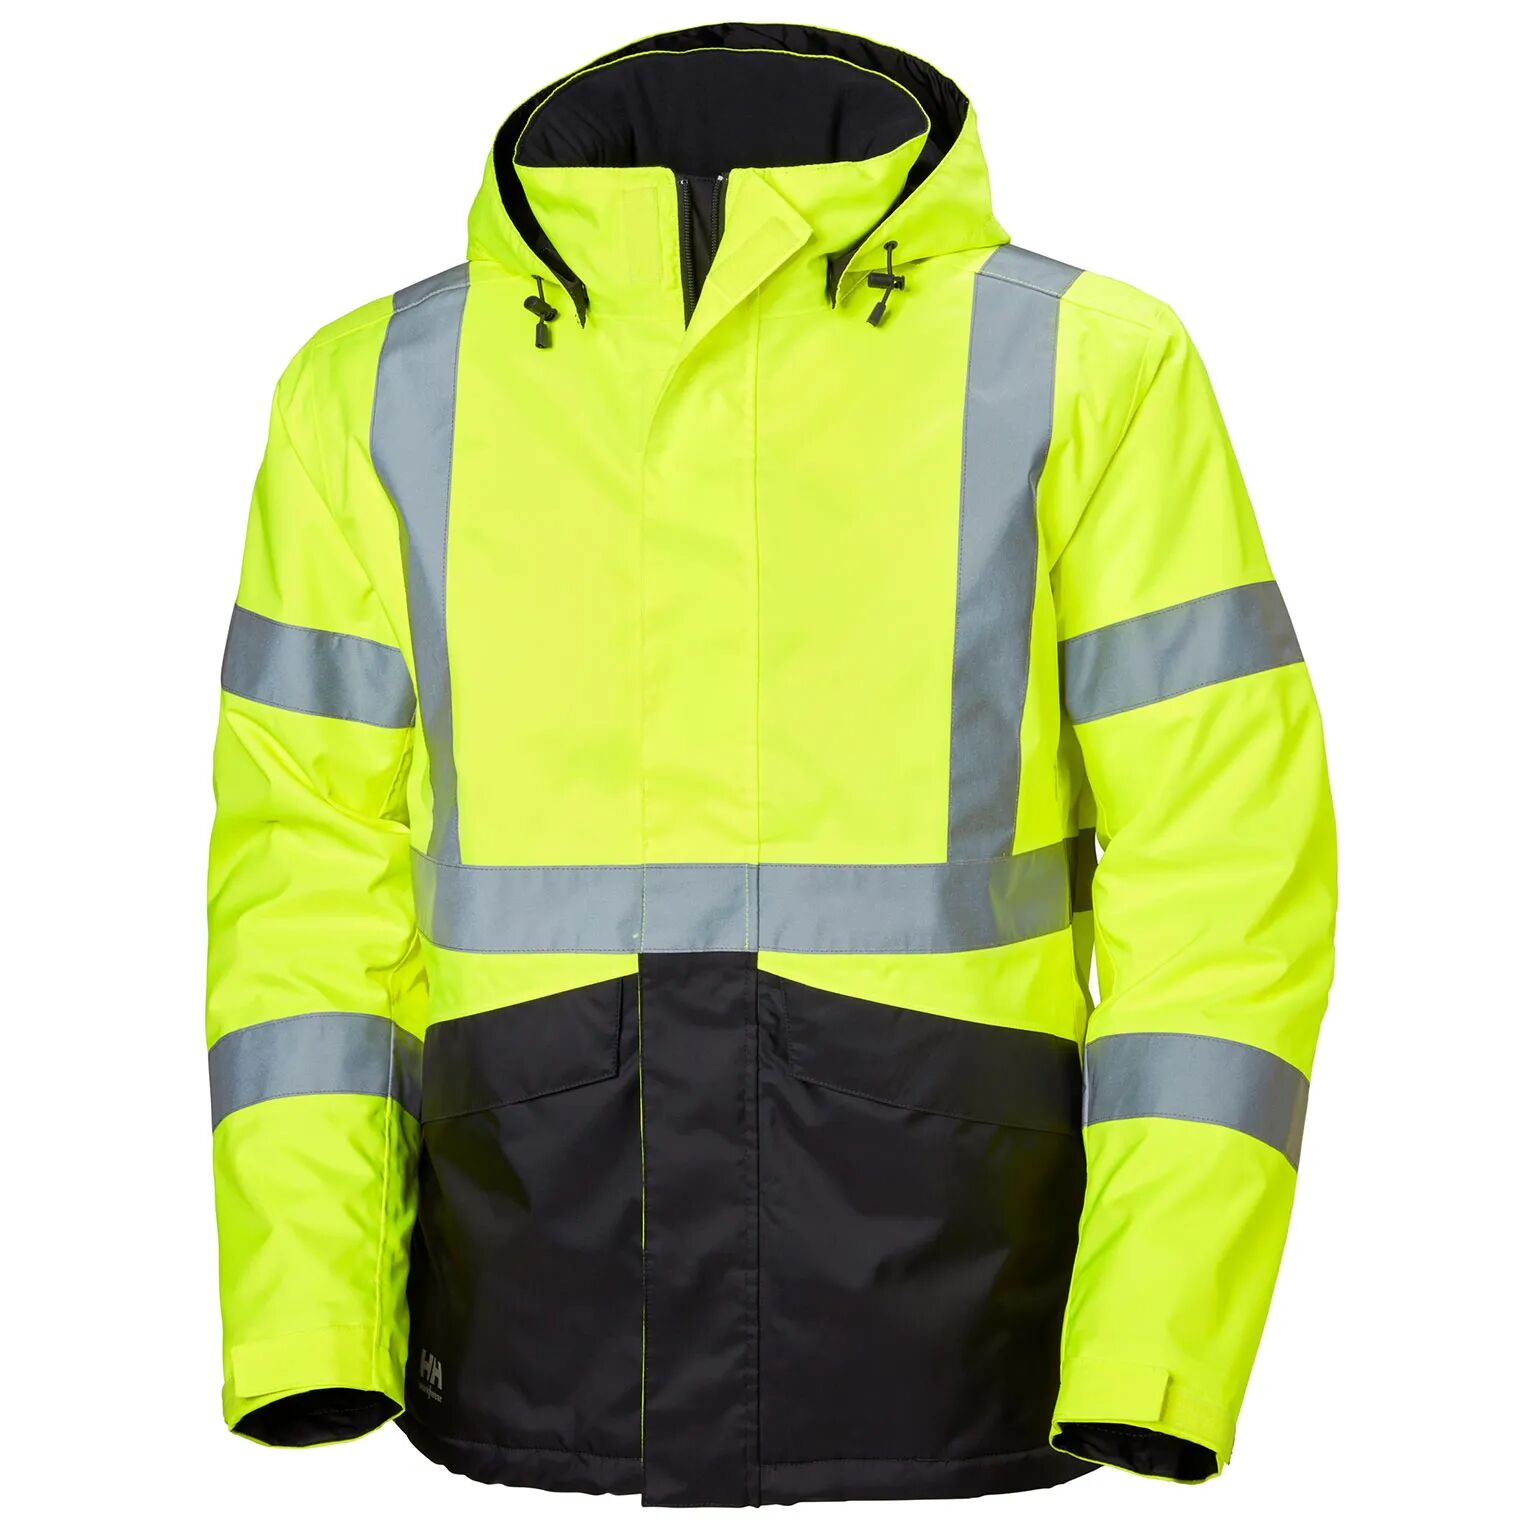 HH Workwear Helly Hansen WorkwearAlta Class 3 High Vis Protective Jacket Yellow S